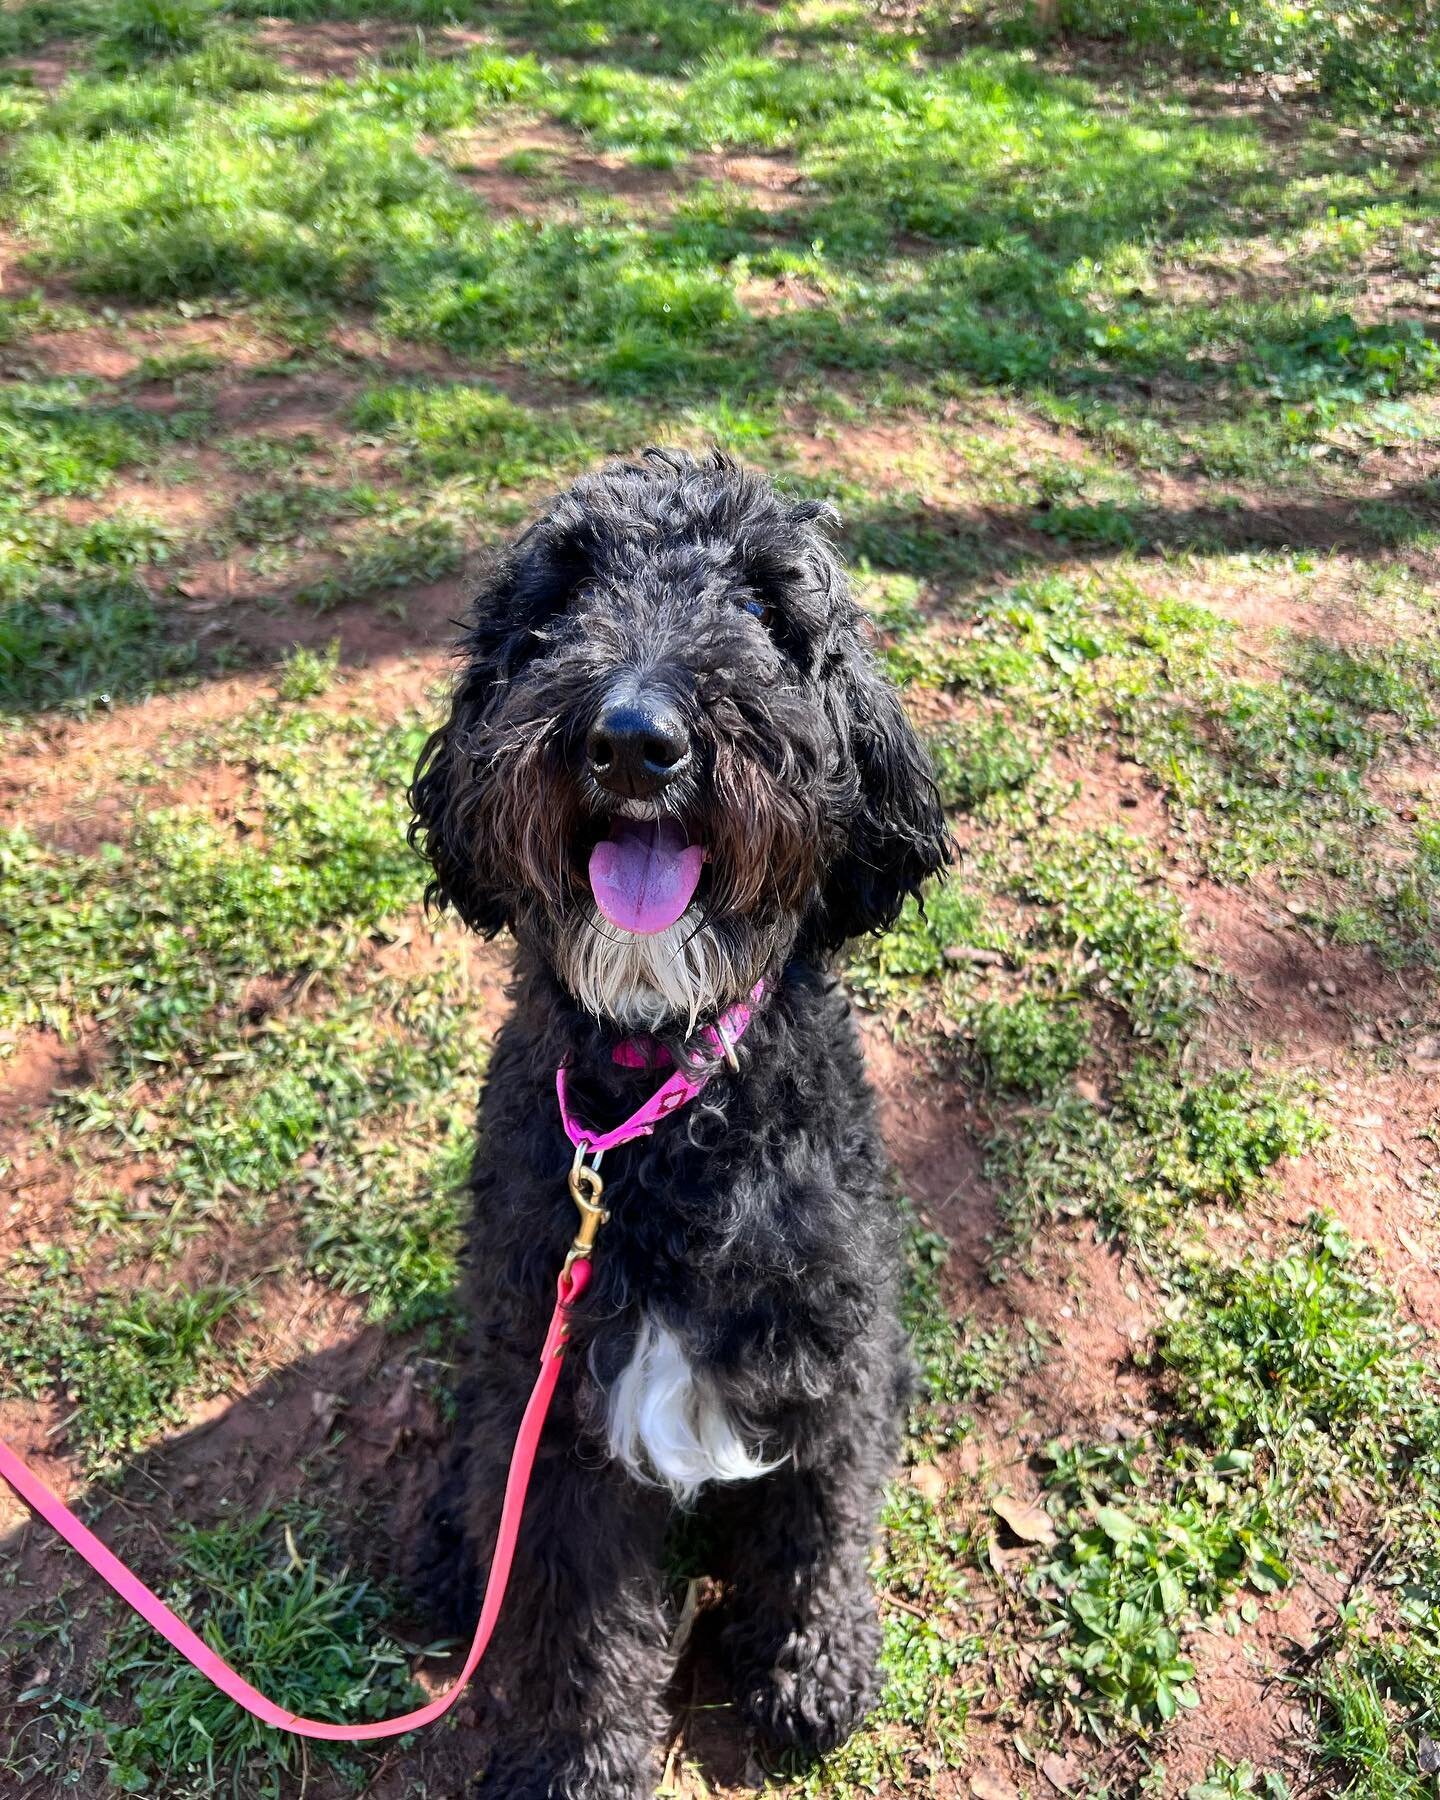 Everybody welcome Dallas! She&rsquo;s a 6 year old Labradoodle here for just boarding. Dallas is a bit shy at first but once she opens up she&rsquo;s so sweet an playful. 
&bull;
#OnAJourney #dogtrainersofatlanta #atlantadogtrainer #boardandtrains #r